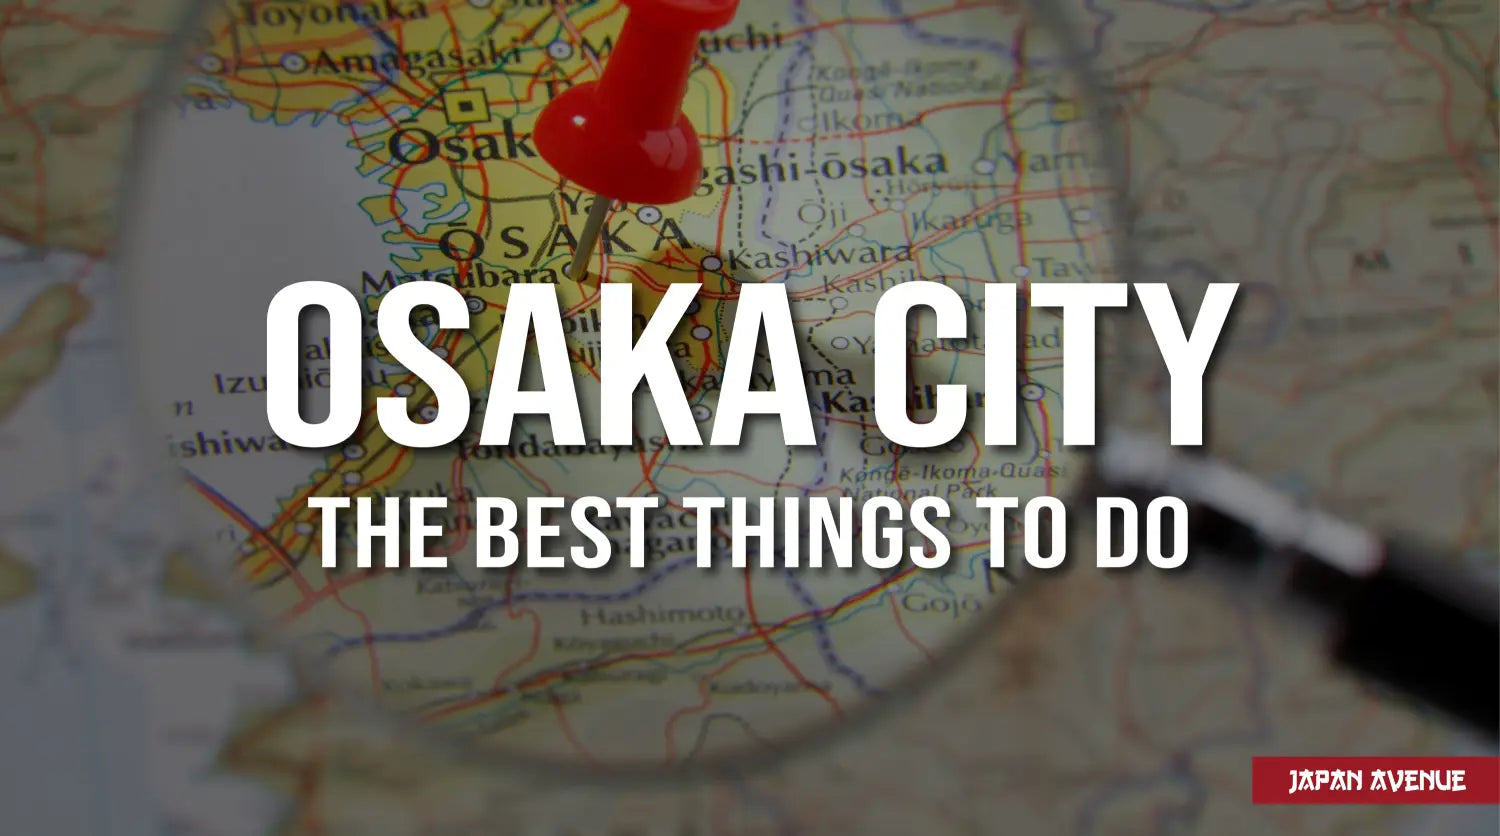 Things to do in Osaka